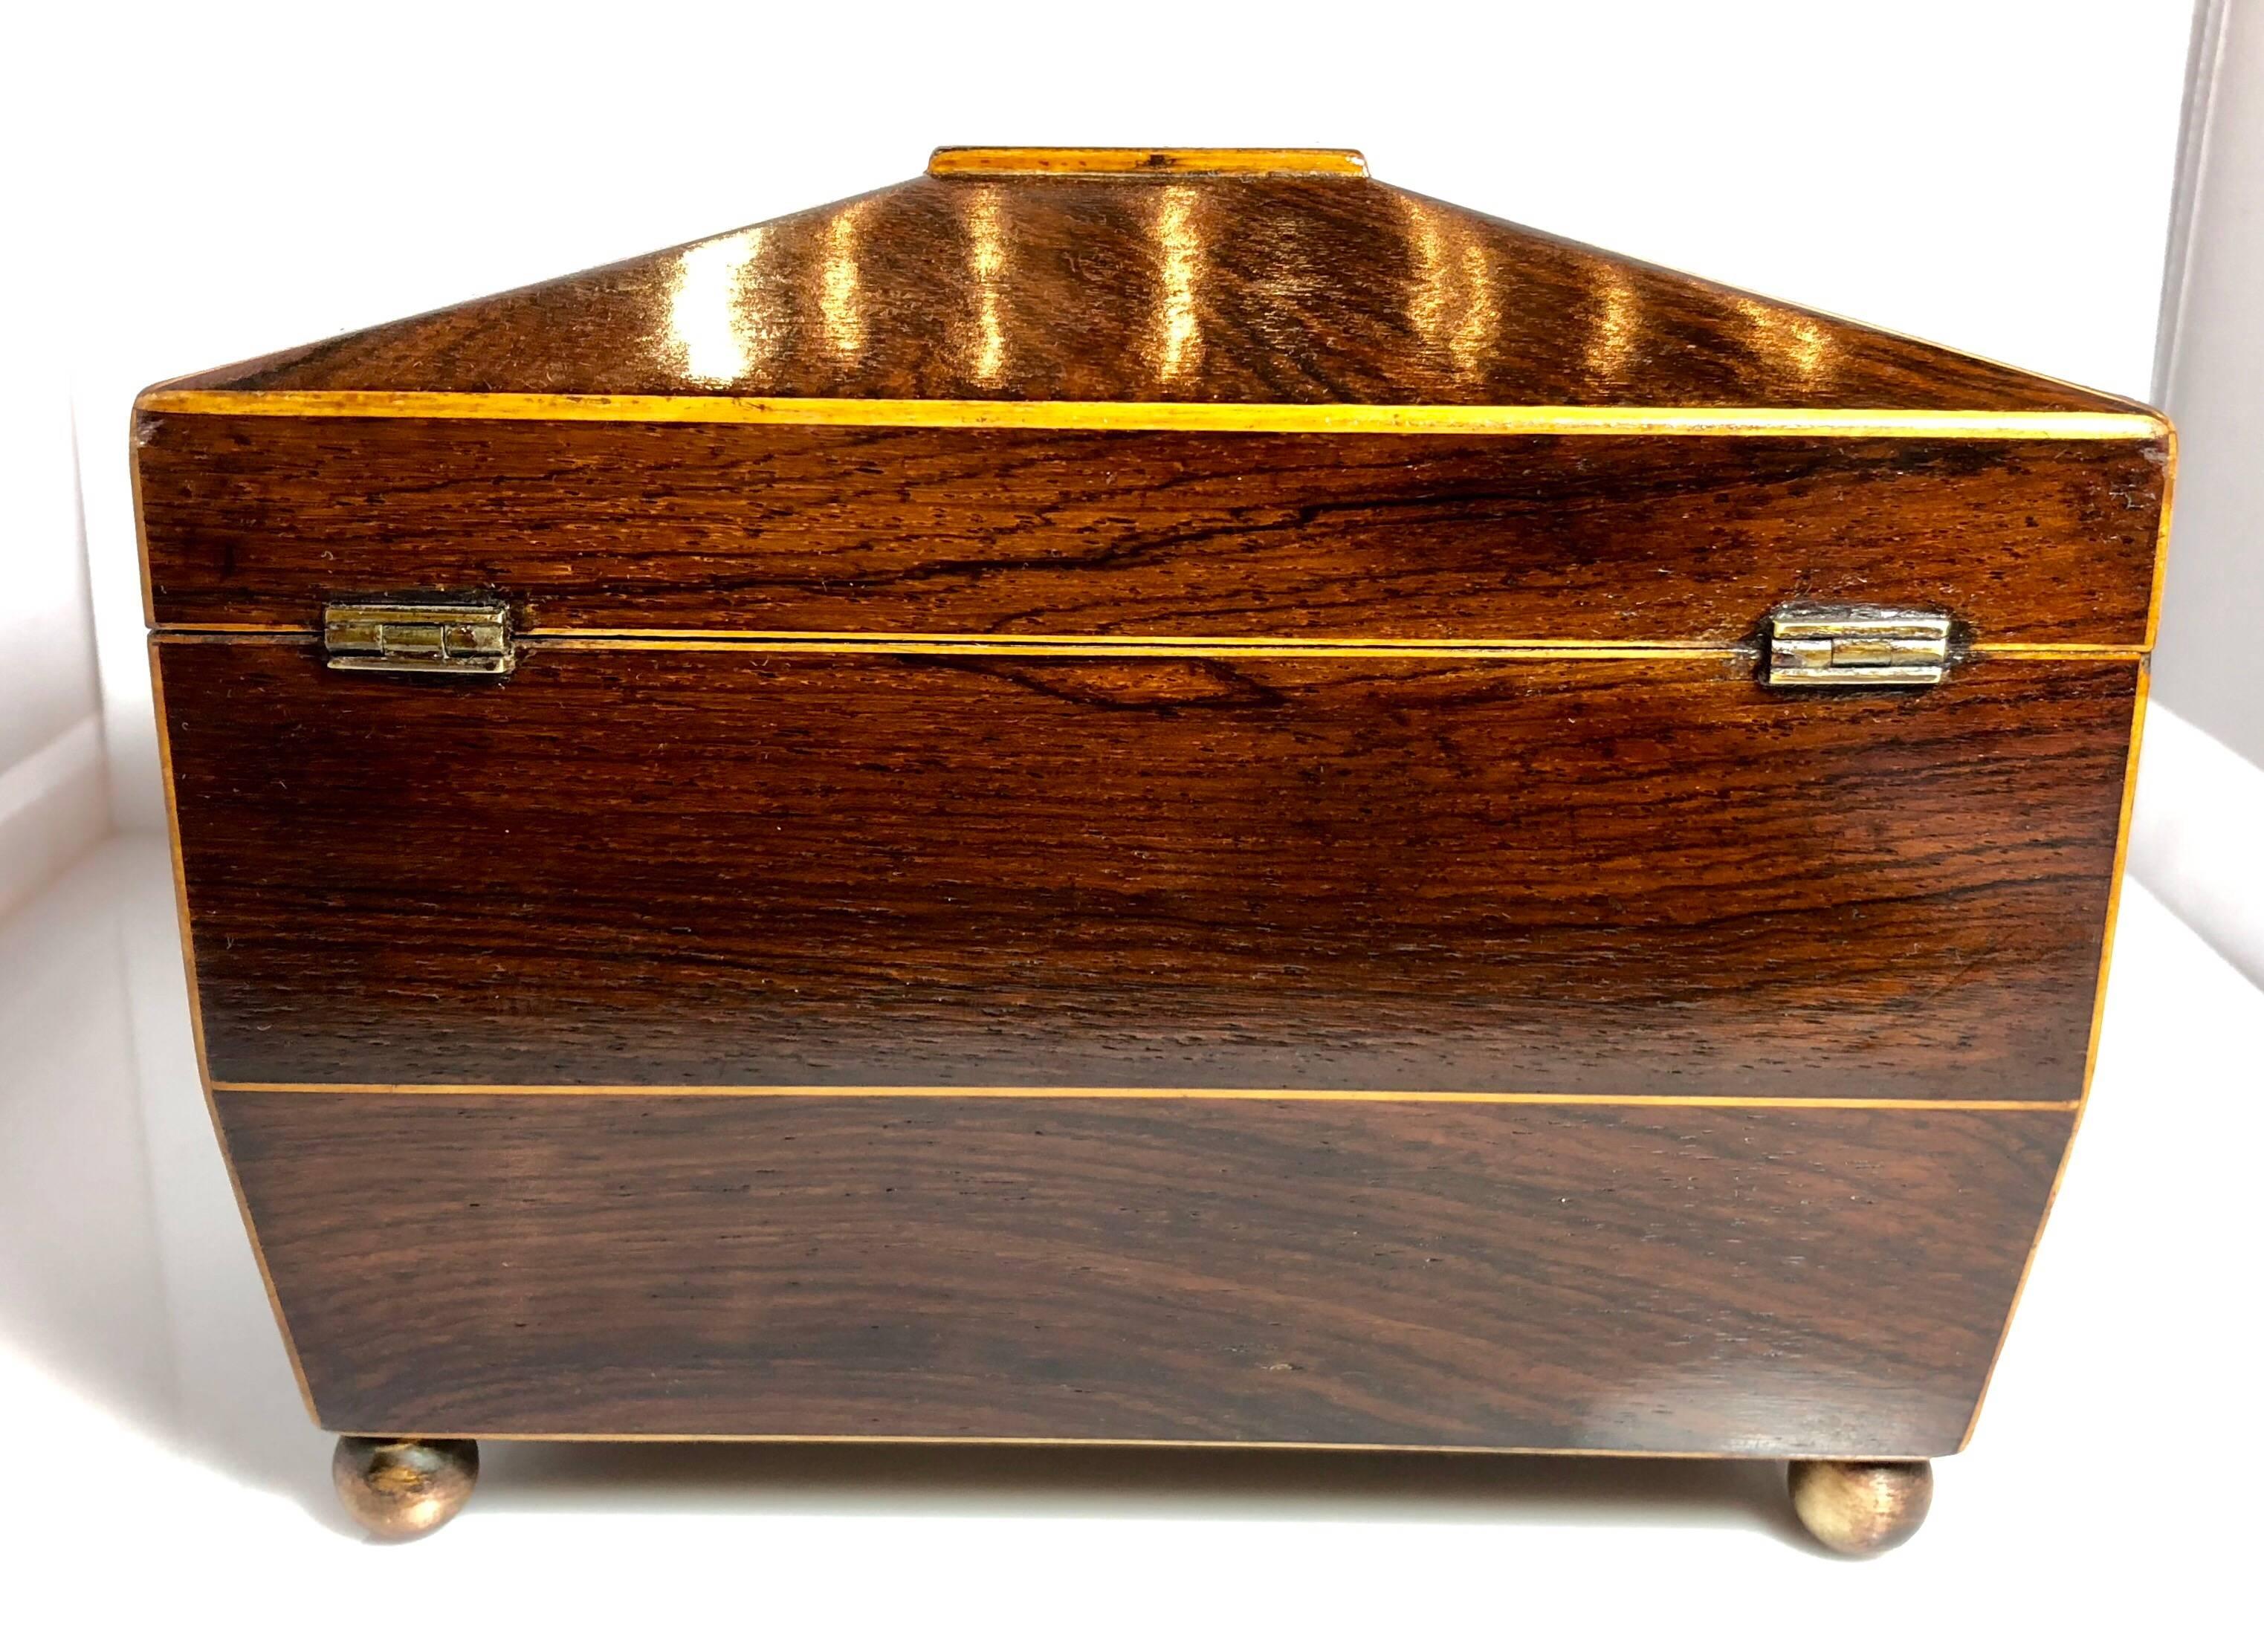 19th Century Antique English Rosewood Tea Caddy with Brass Mounts, circa 1880